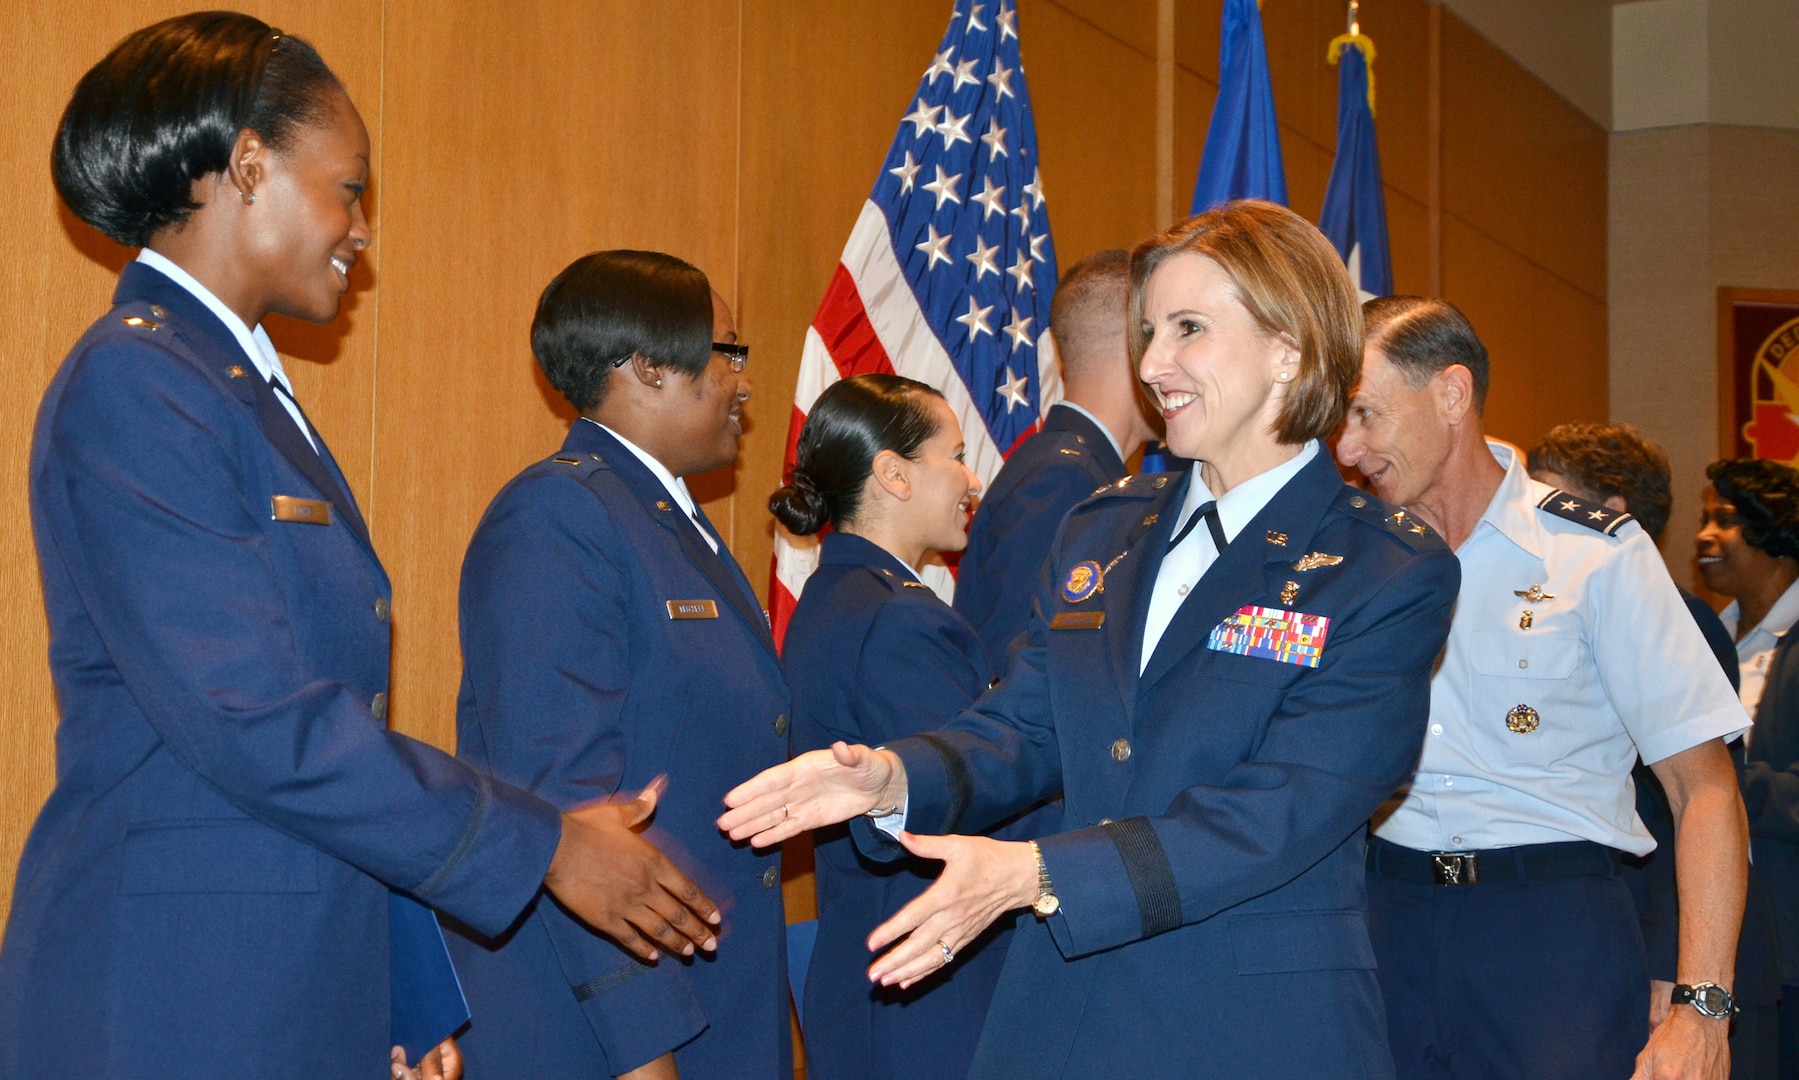 Maj. Gen. Kimberly A. Siniscalchi, assistant Air Force surgeon general, Medical Force Development, Nursing Services, shakes hands with 2nd Lt. Stephanie Lord (left), one of the 12 Air Force Nursing Residency Program graduates following their graduation ceremony Aug. 20 at the San Antonio Military Medical Center. (Photo by Lori Newman, JBSA-Fort Sam Houston Public Affairs)